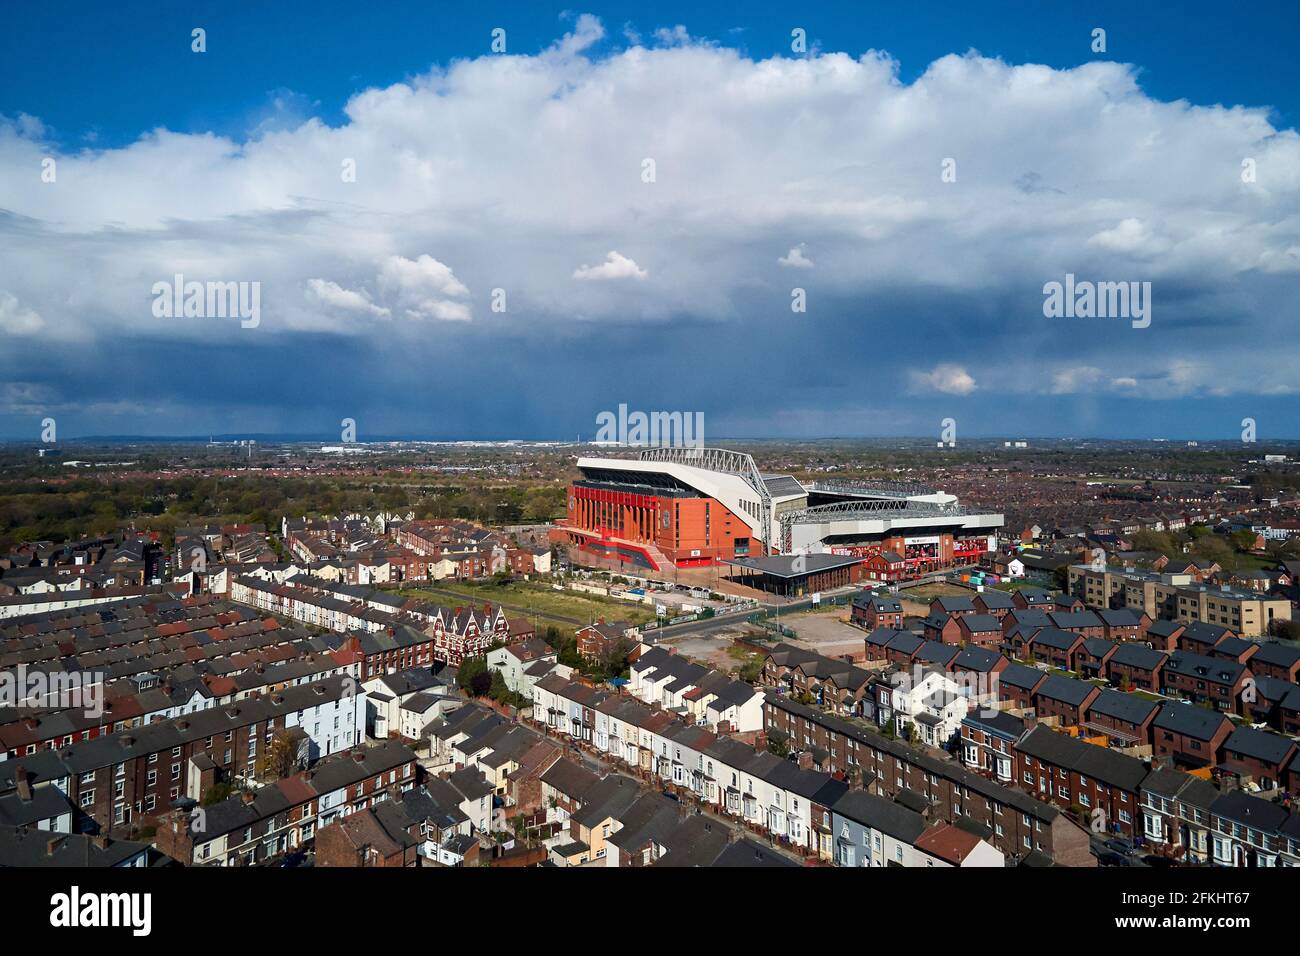 Aerial view of Anfield showing the stadium in it’s urban setting surrounded by residential houses Stock Photo